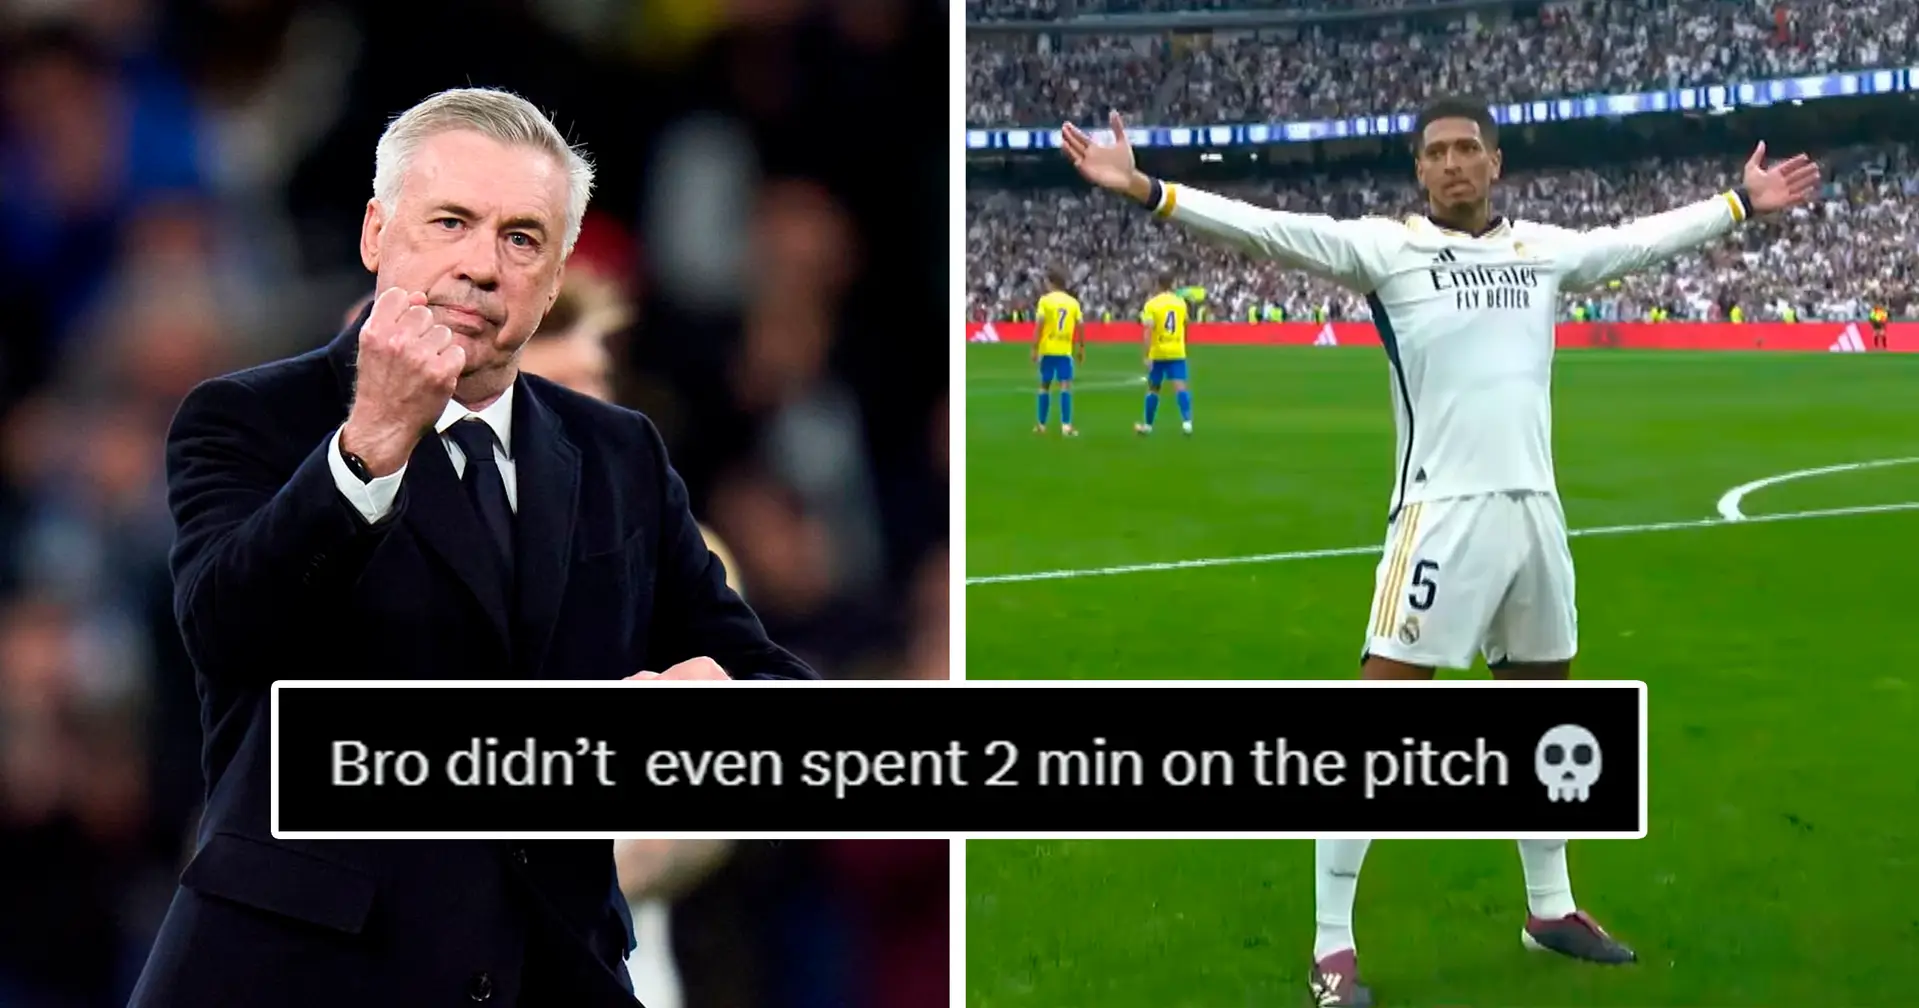 'Bro came to warm up': Real Madrid fans react to Bellingham's goal less than 2 minutes after coming on the pitch